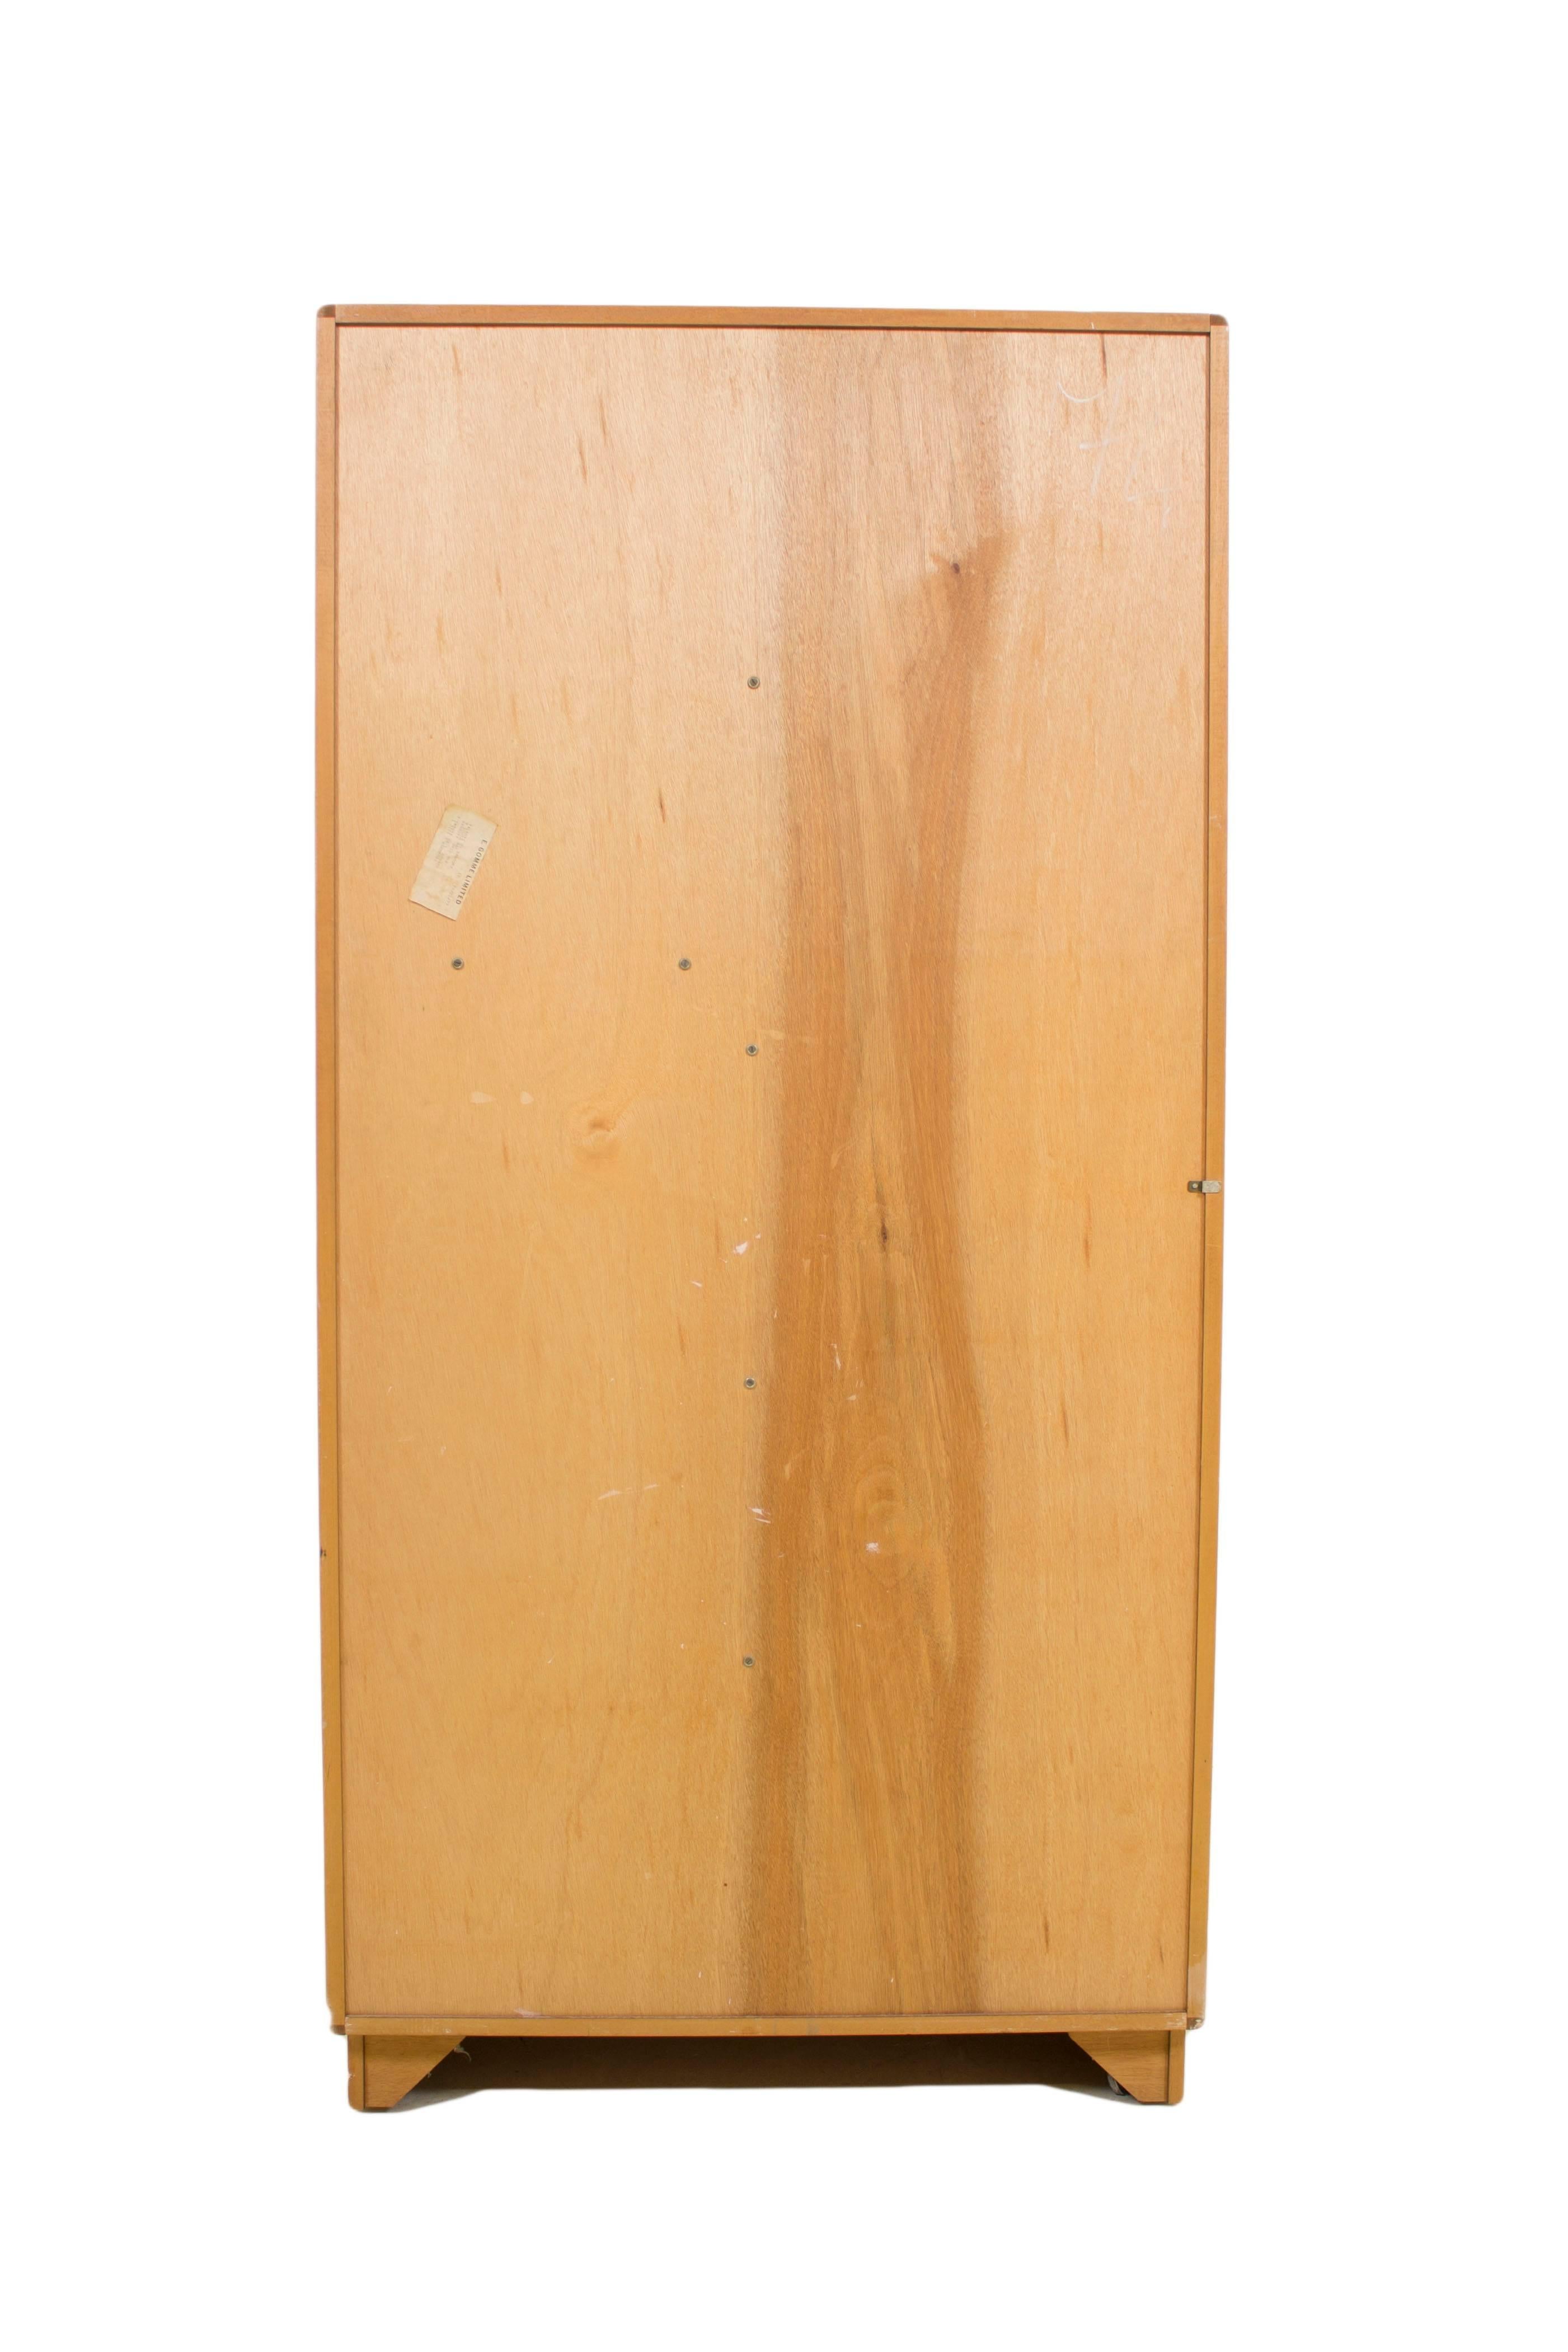 G Plan Fresco Double Gentlemen’s Teak Wardrobe by Victor Wilkins In Excellent Condition For Sale In Greater Manchester, GB